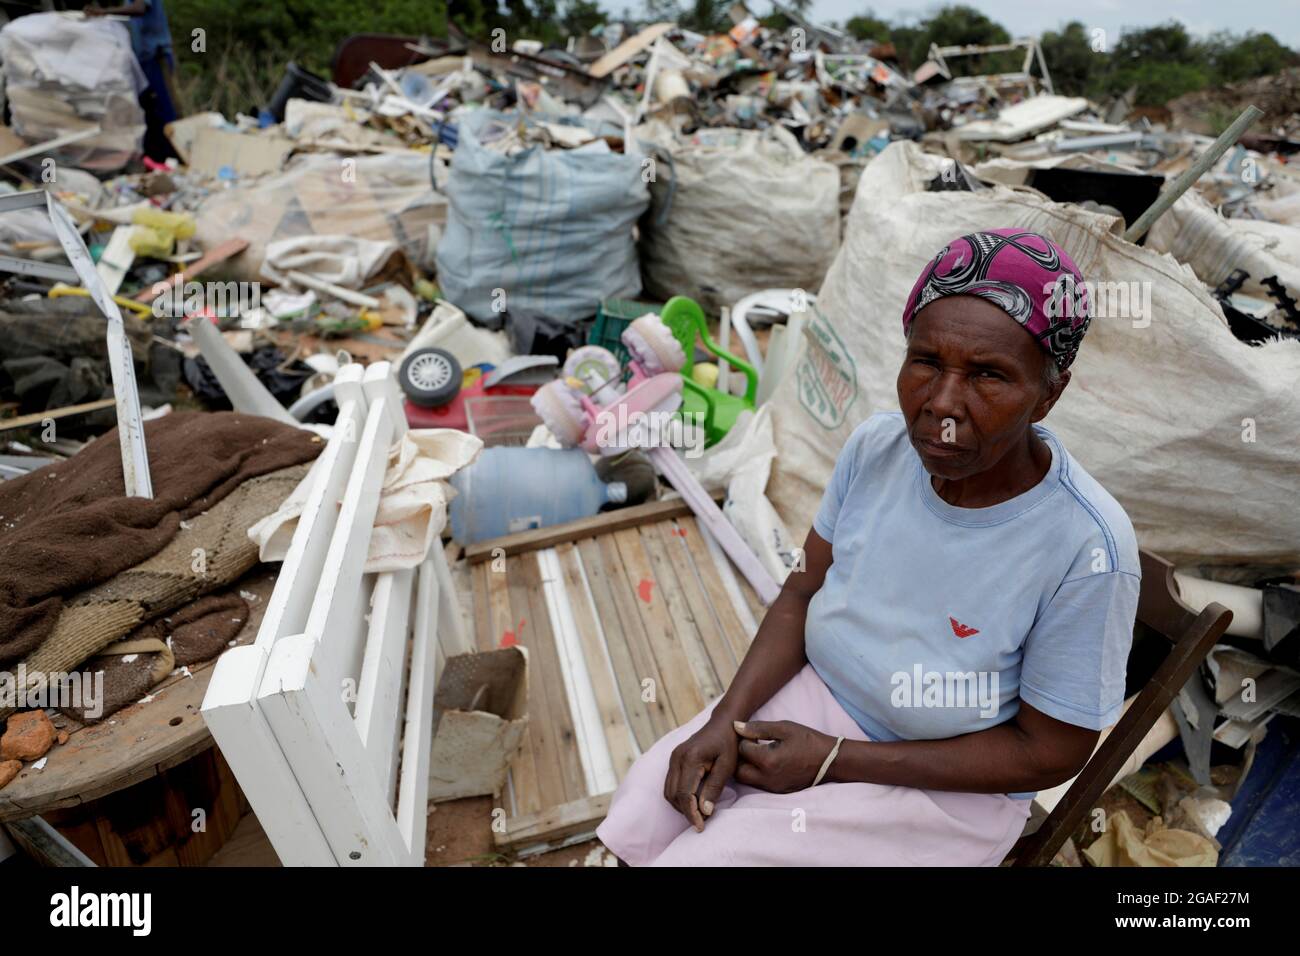 lauro de freitas, bahia, brazil - march 14, 2019: elderly woman collecting material for recycling at a landfill in the city of Lauro de Freitas. Stock Photo